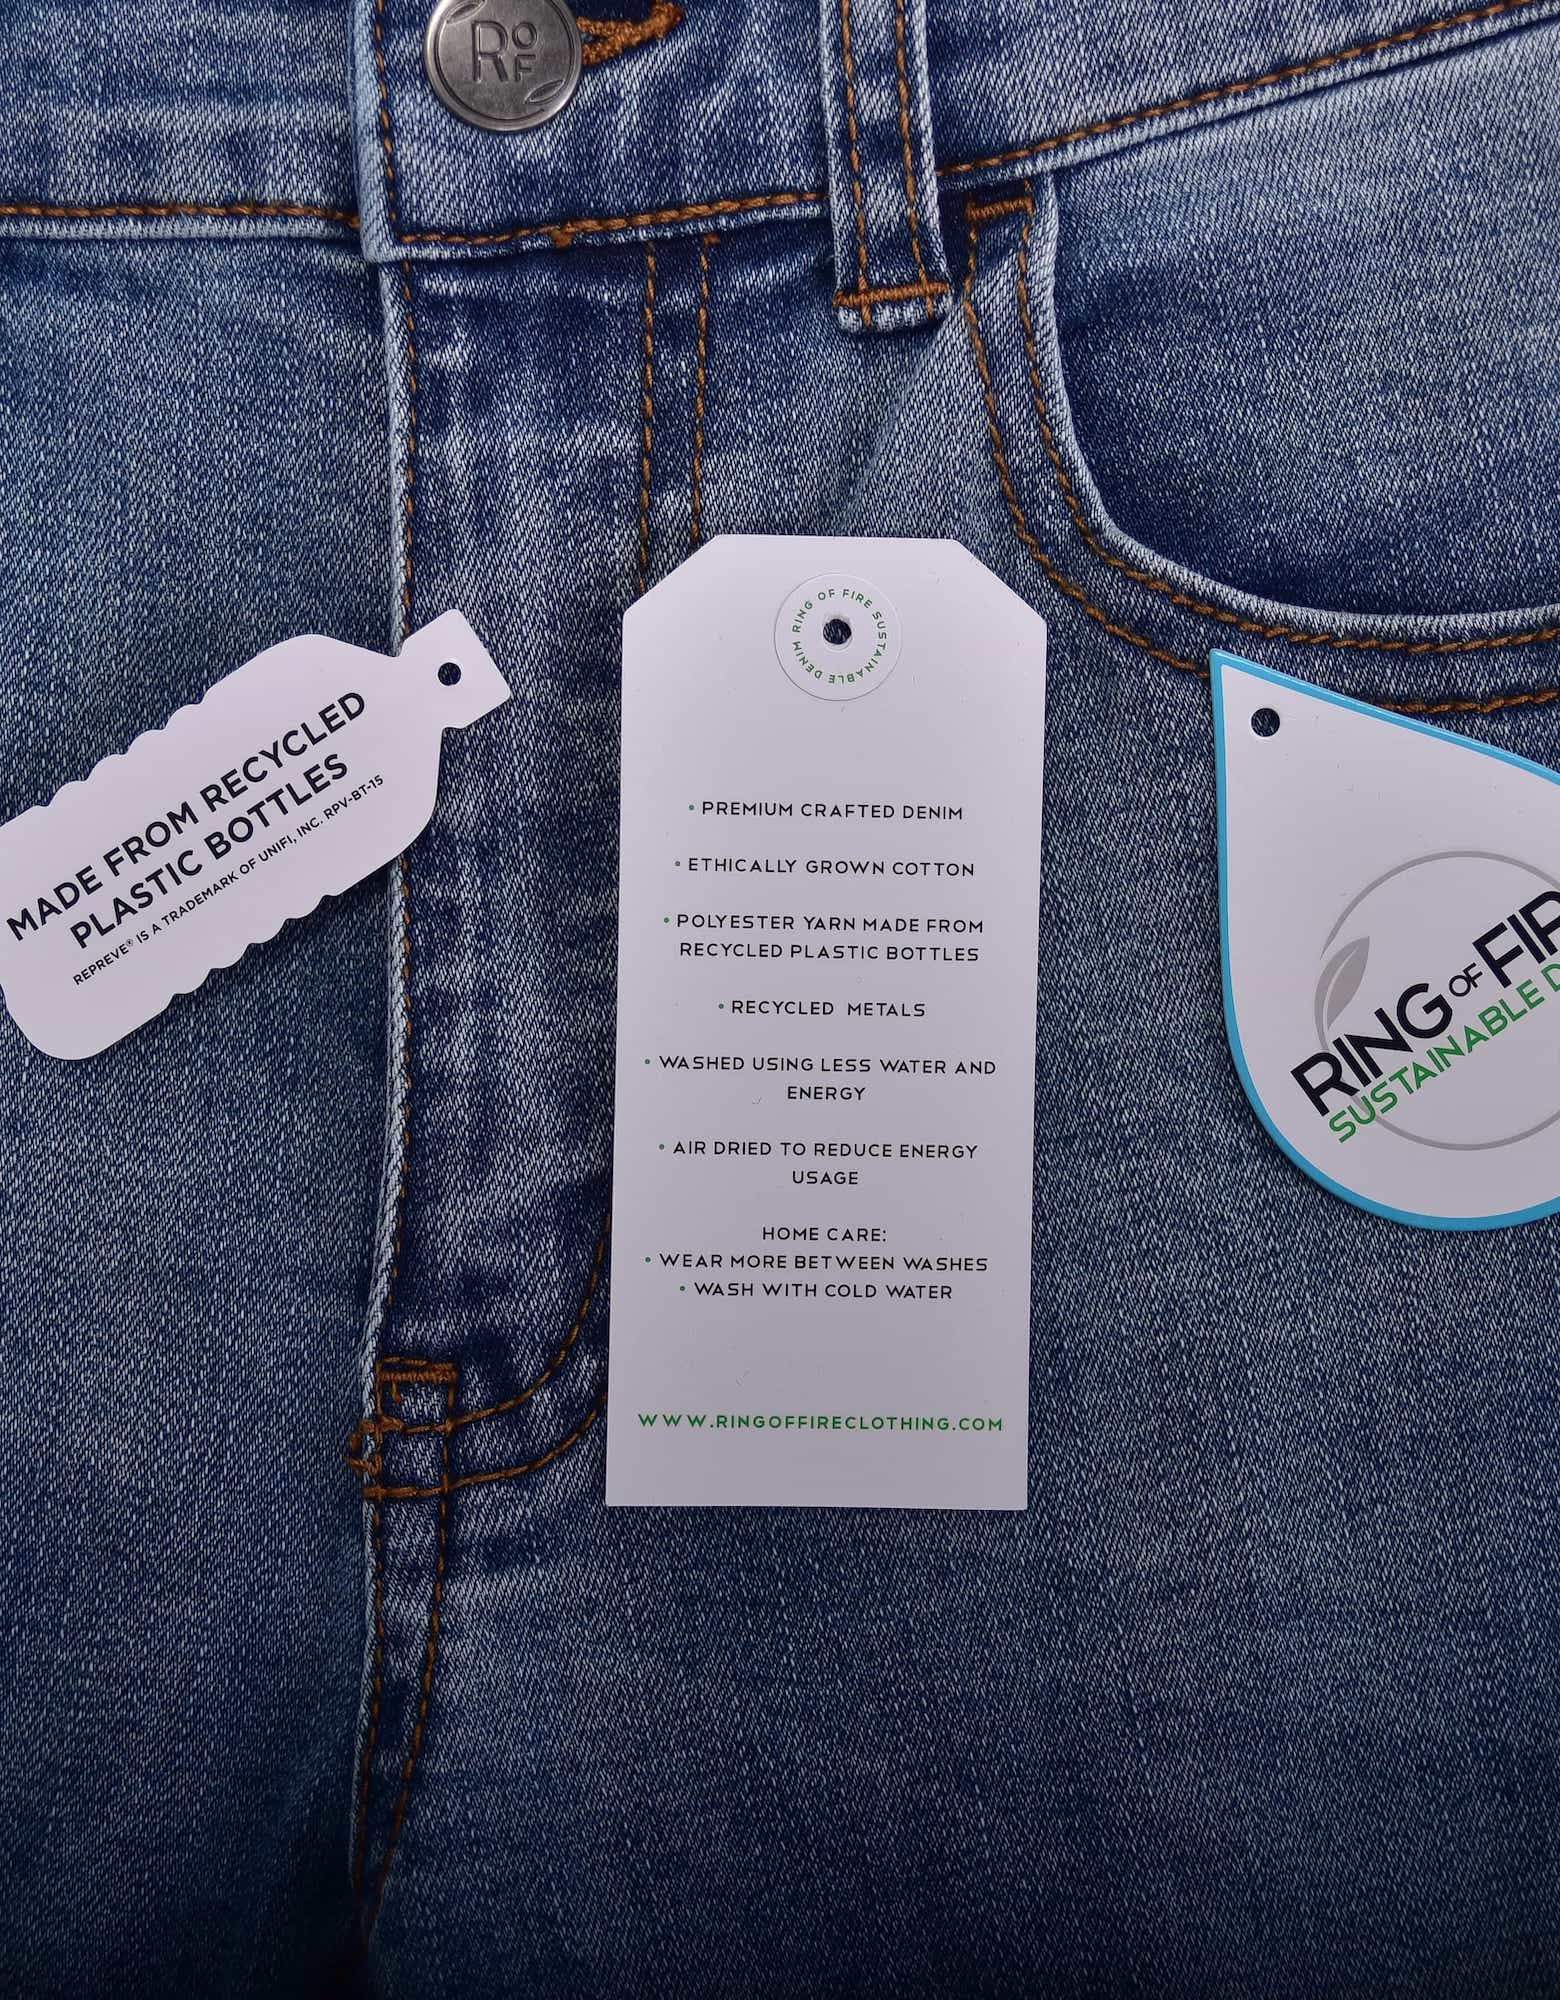 Ring of Fire Boy's Tumble Recycled Fabric Sustainable Denim Skinny Jeans - image 5 of 10